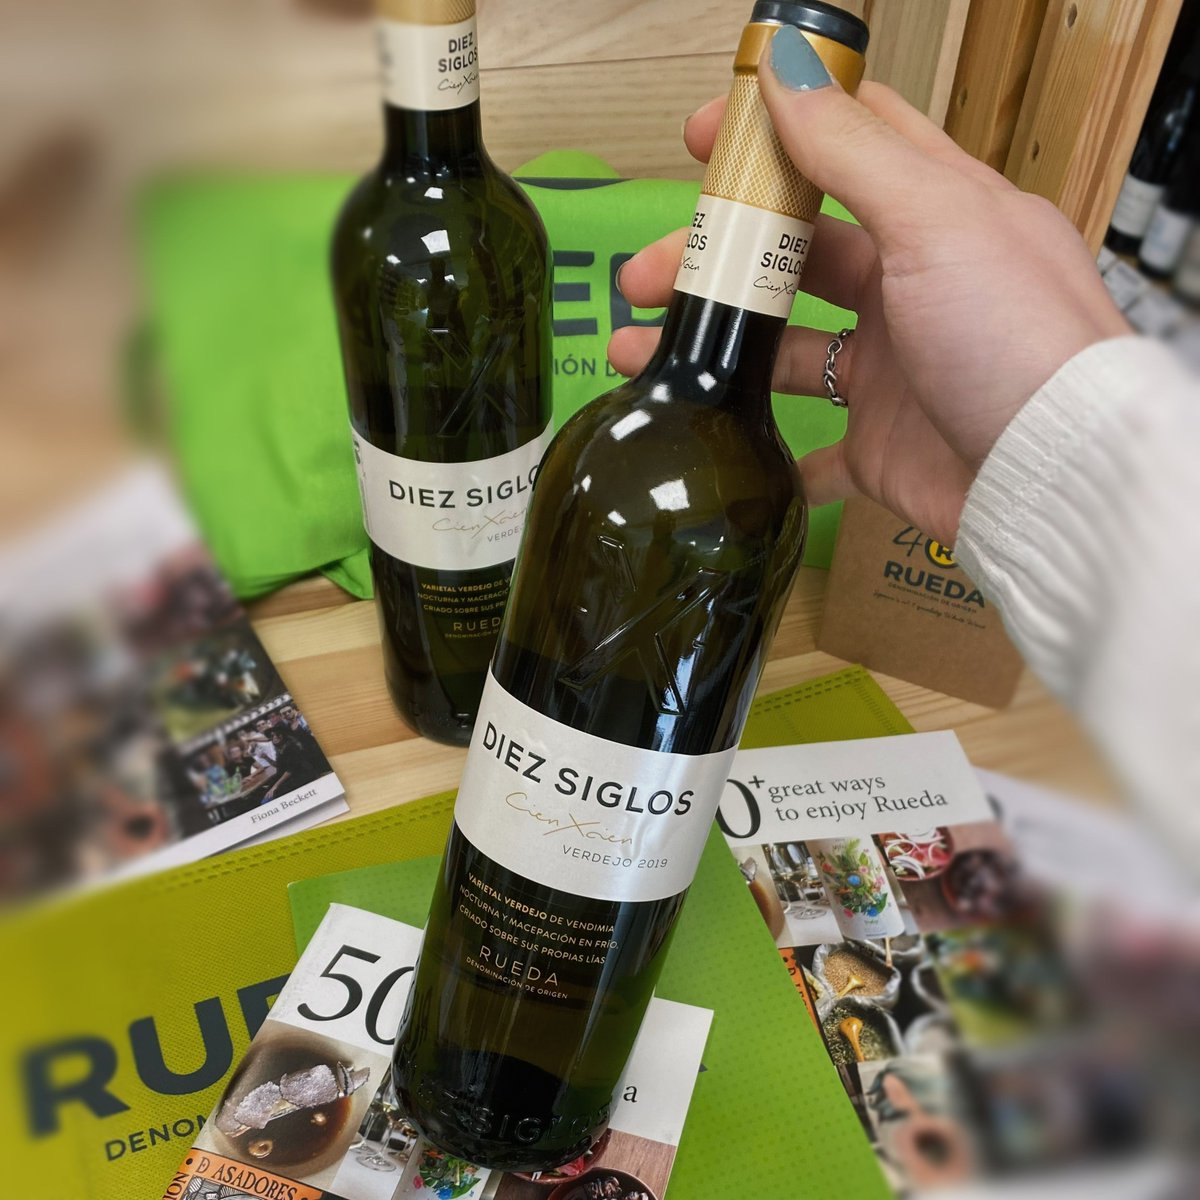 Diez Siglos 2019 is a complex, vibrant Spanish white from Rueda ☀️ 

As part of our #TasteRueda promotion, it is available for just £9.50 and you will get 100 bonus loyalty points 😁 
bit.ly/38iC47M

@DORuedaUK  #rueda #winesofrueda #ruedaverdejo #verdejo #enjoyrueda